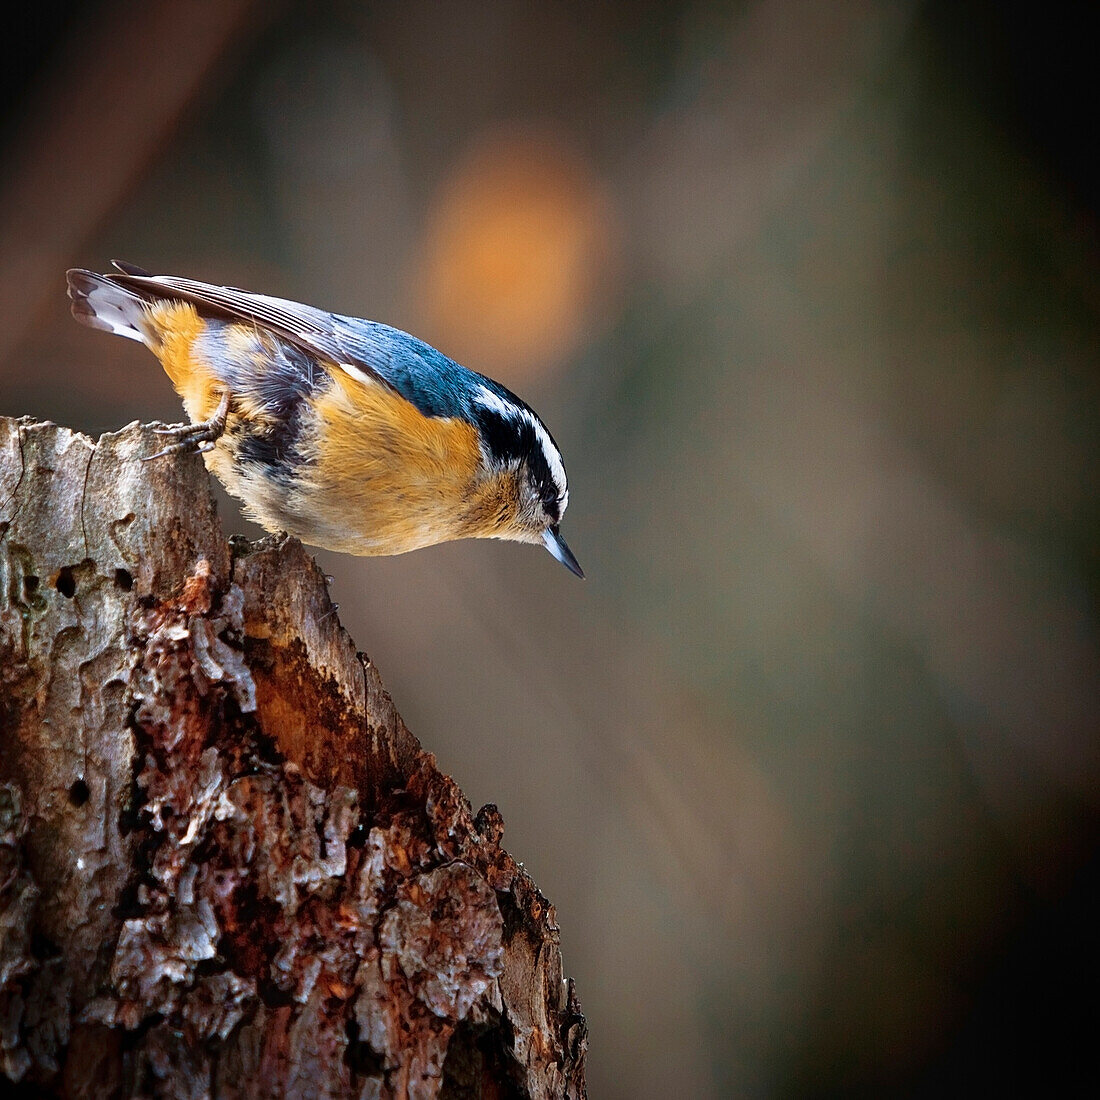 'A Small Bird With Gold And Blue Feathers Stands On A Tree Stump; Edmonton, Alberta, Canada'